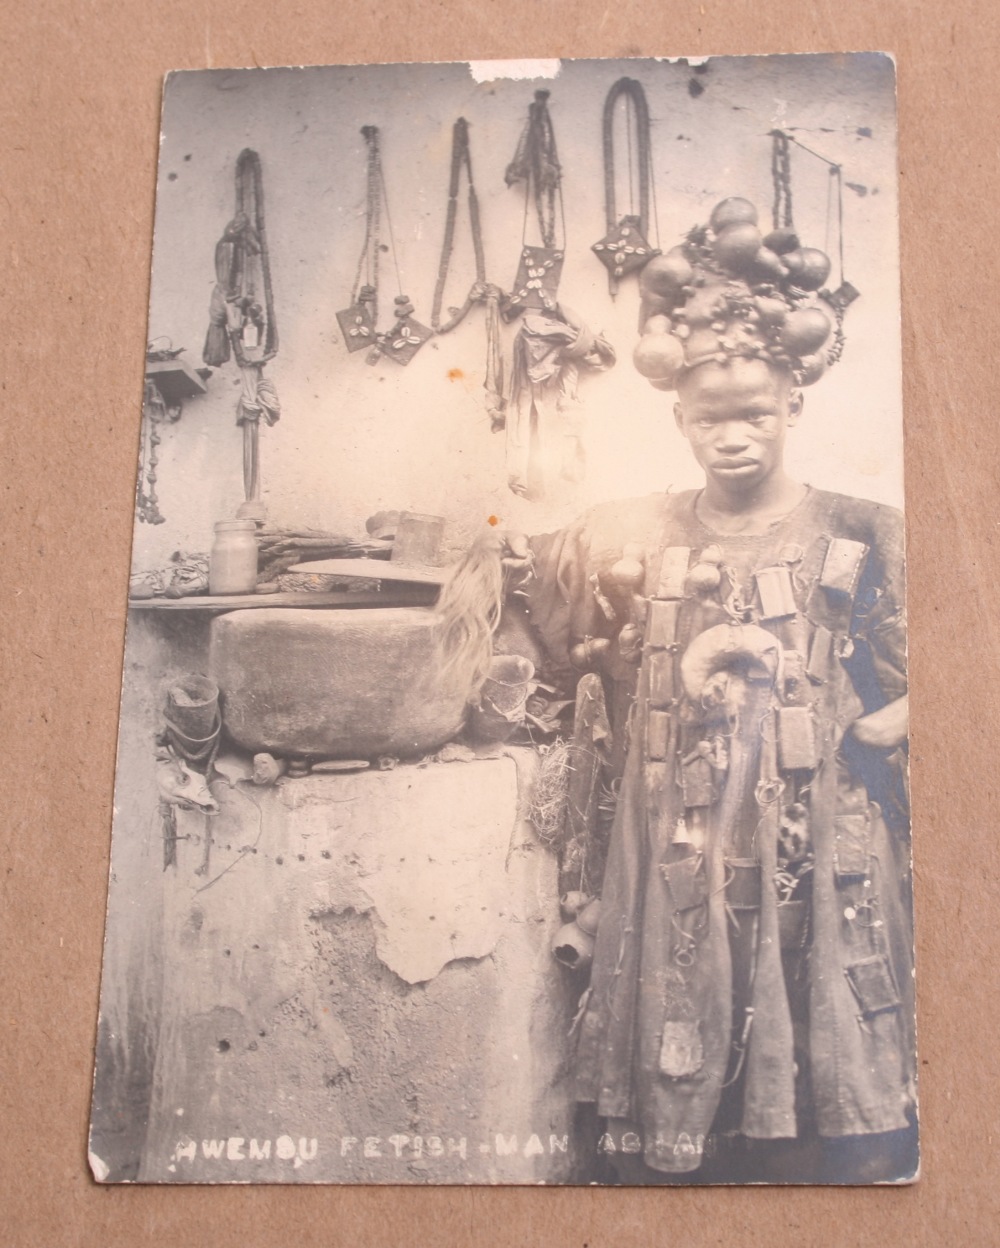 Photograph Album in Nigeria 1920's consisting of mostly snap shot photographs. Interesting images of